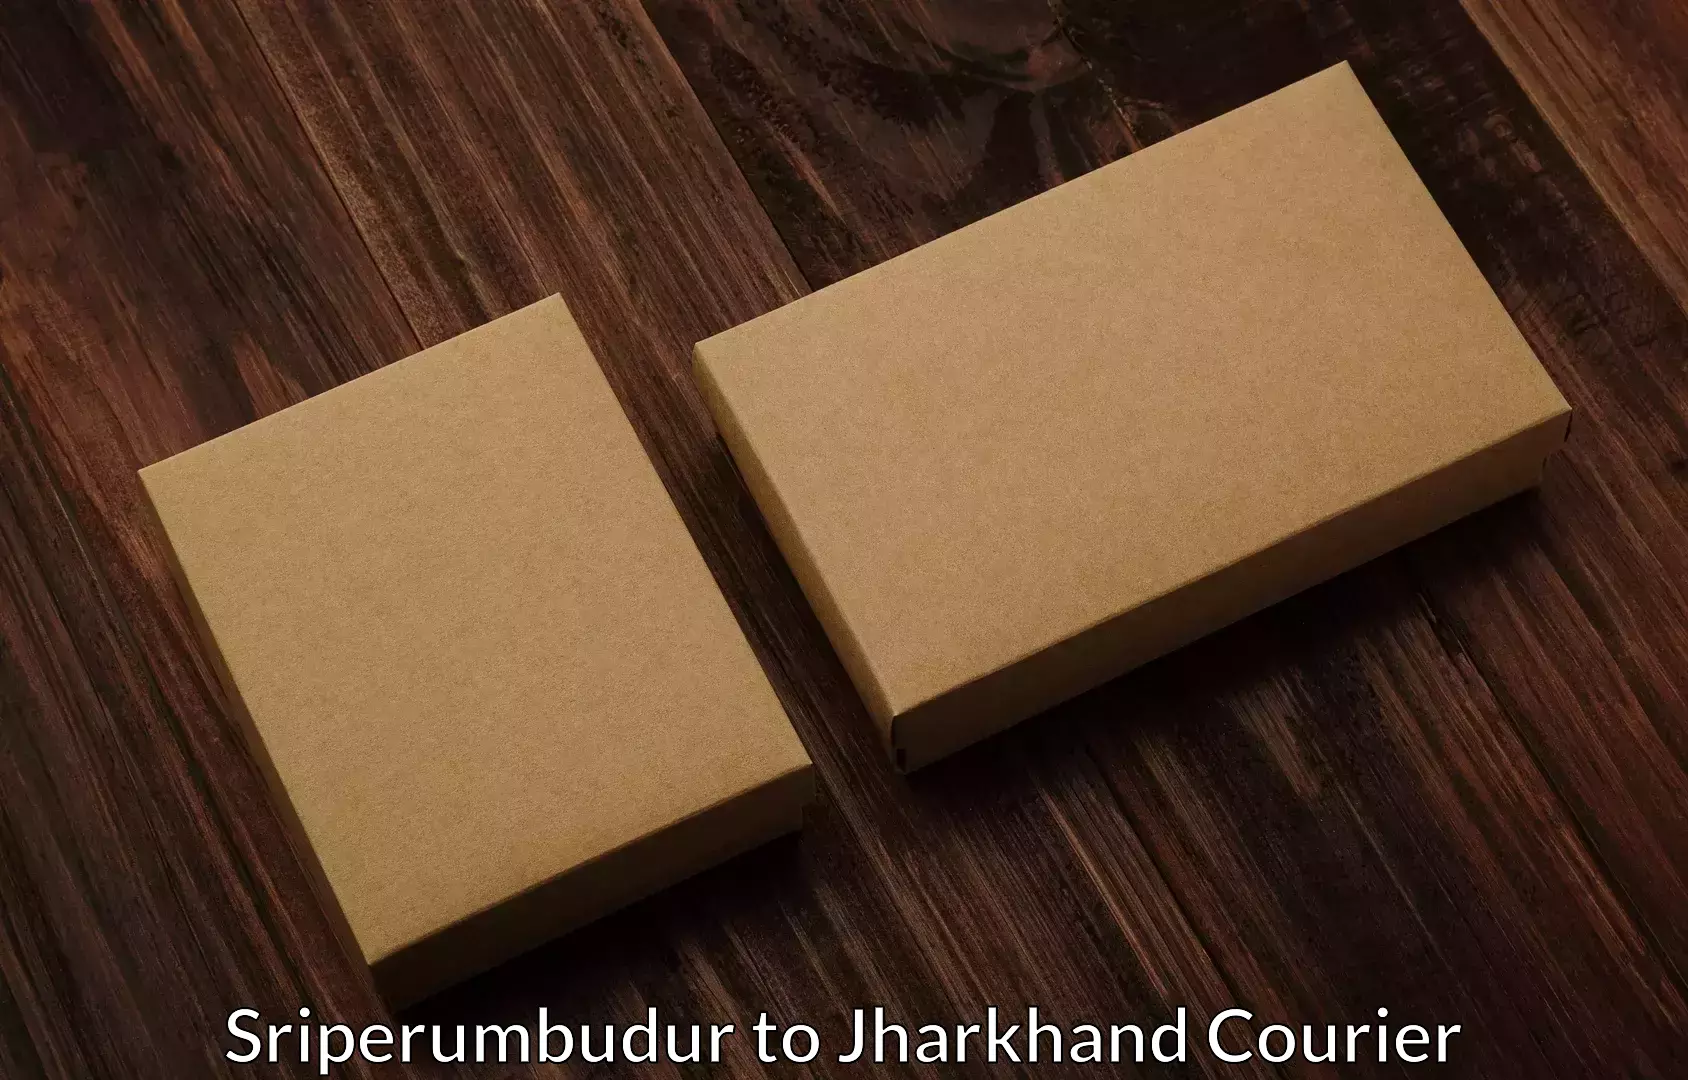 Home moving specialists Sriperumbudur to Jharkhand